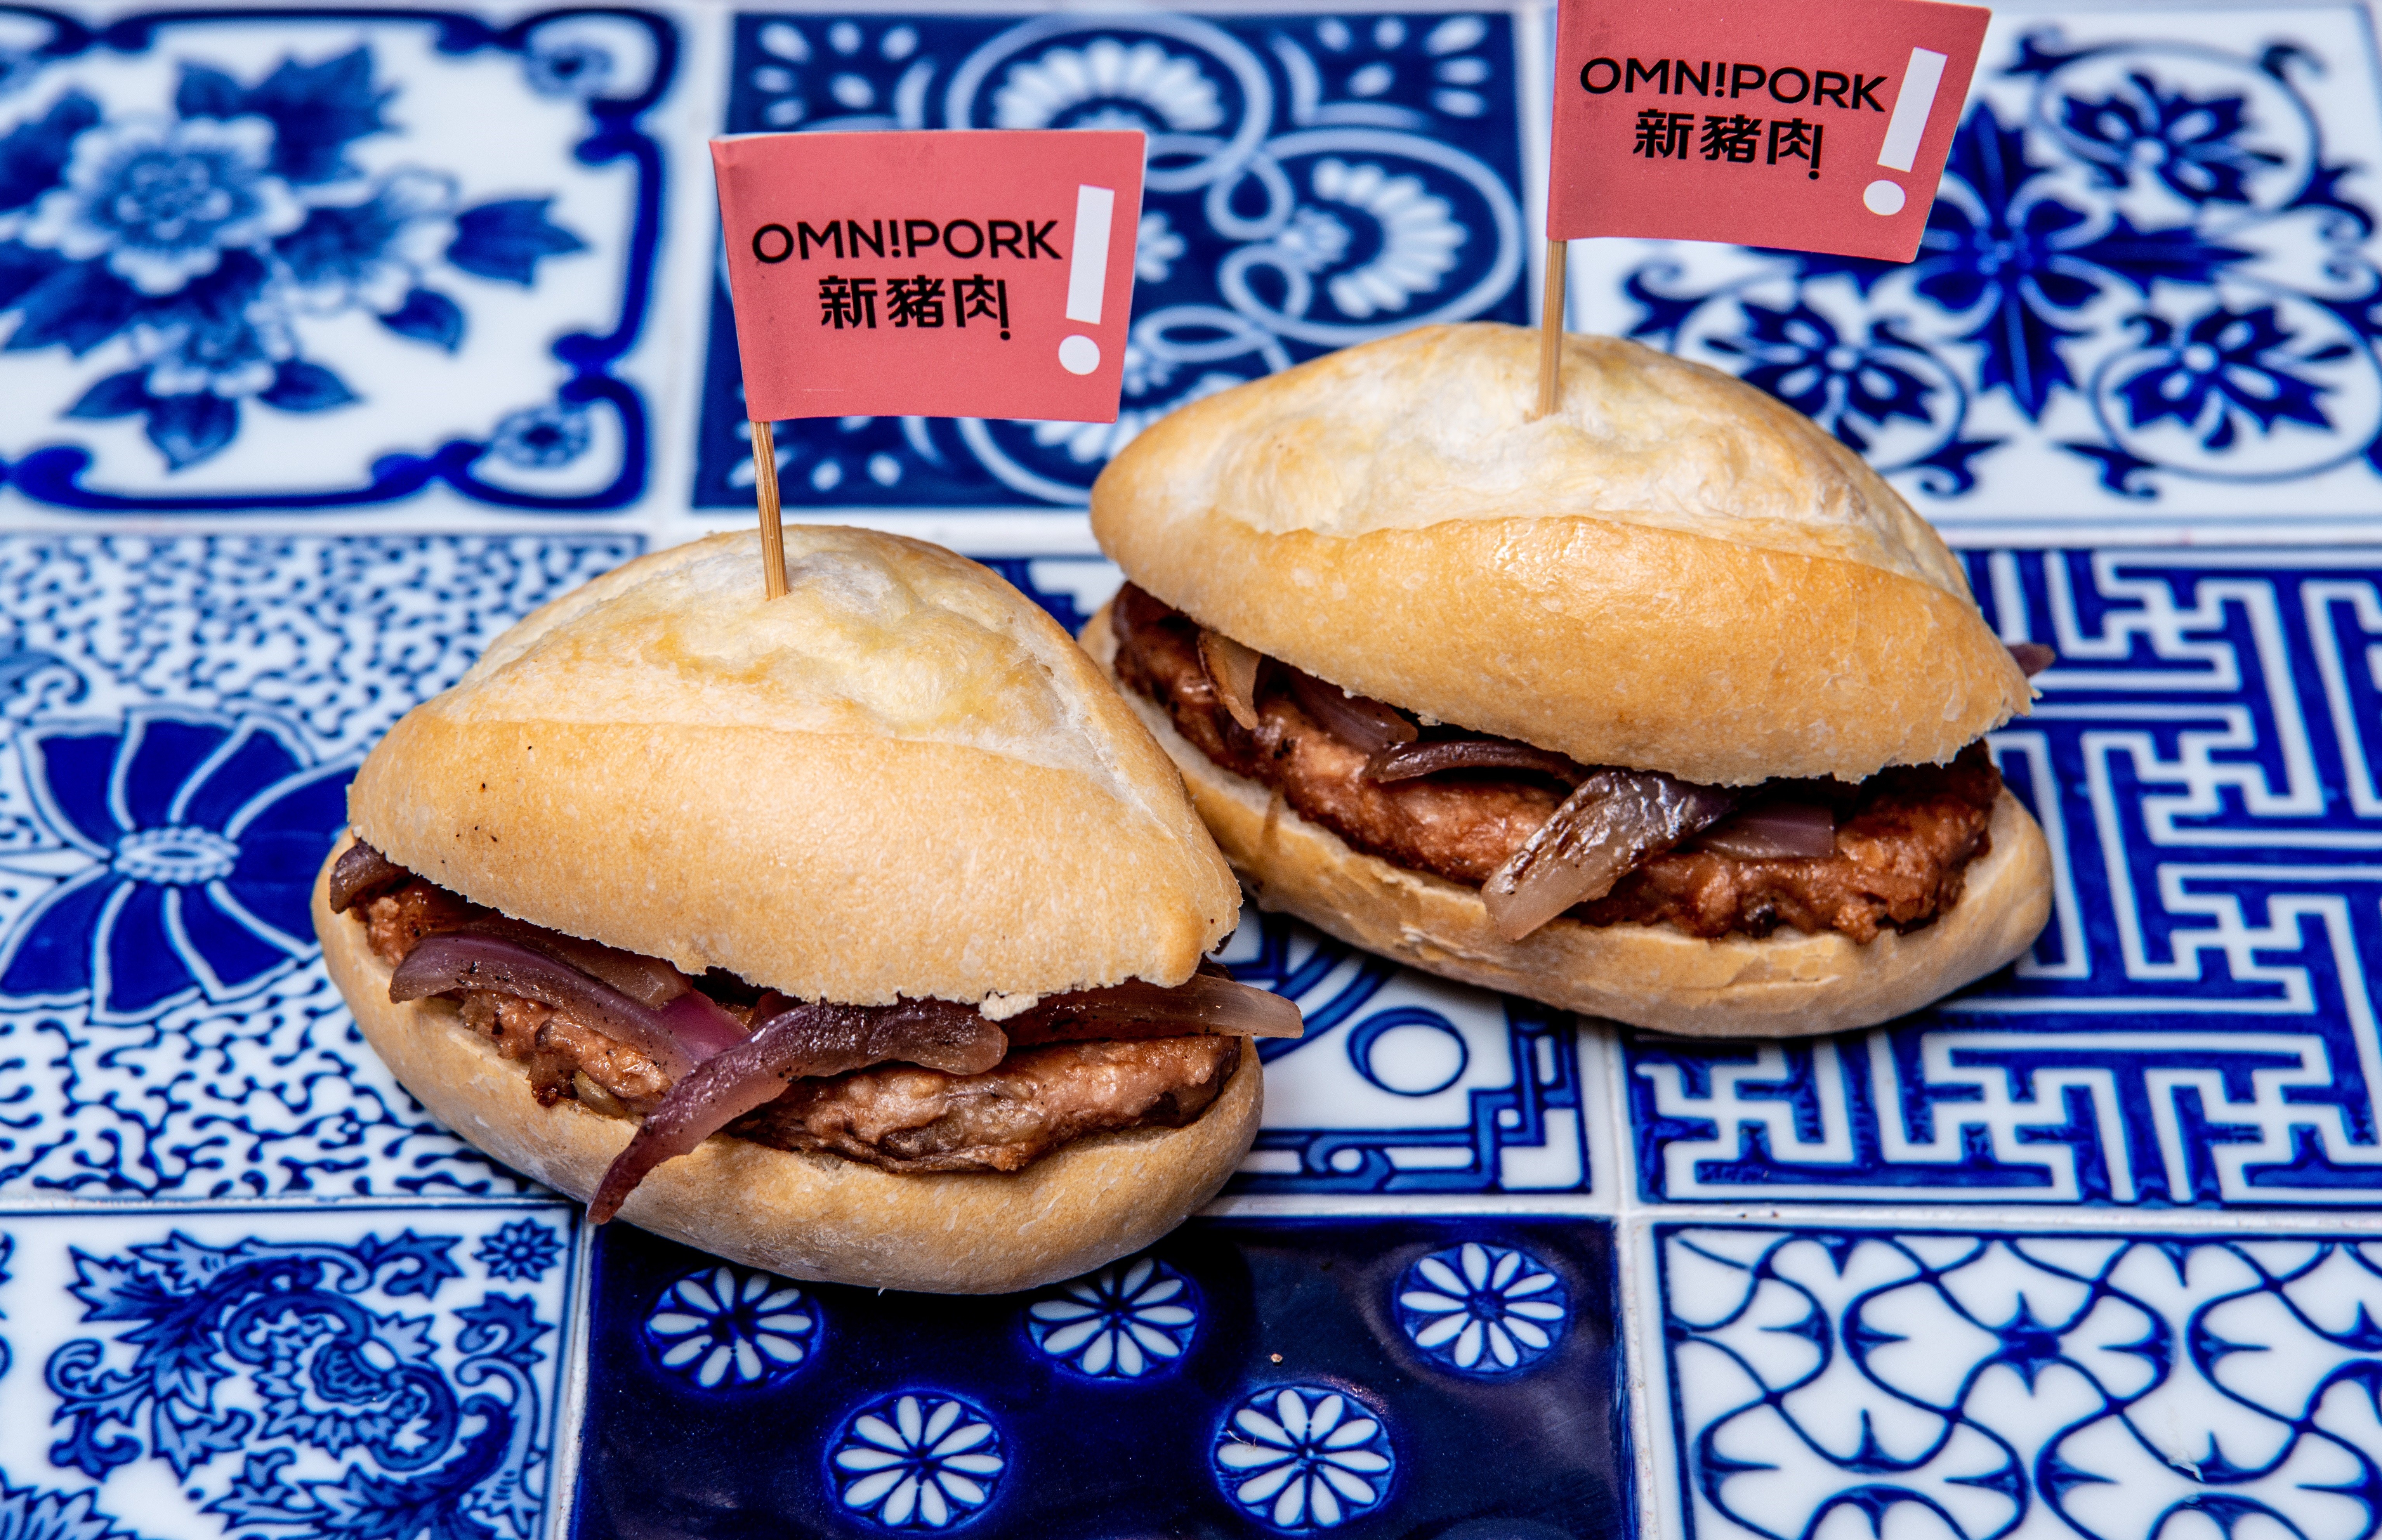 Sands Omnipork ‘pork chop’ bun, served at Sands Resorts Macao, is just one of the dishes featuring the plant-based meat now being served at restaurants in hotels owned by the Macau resort operator, Sands China.